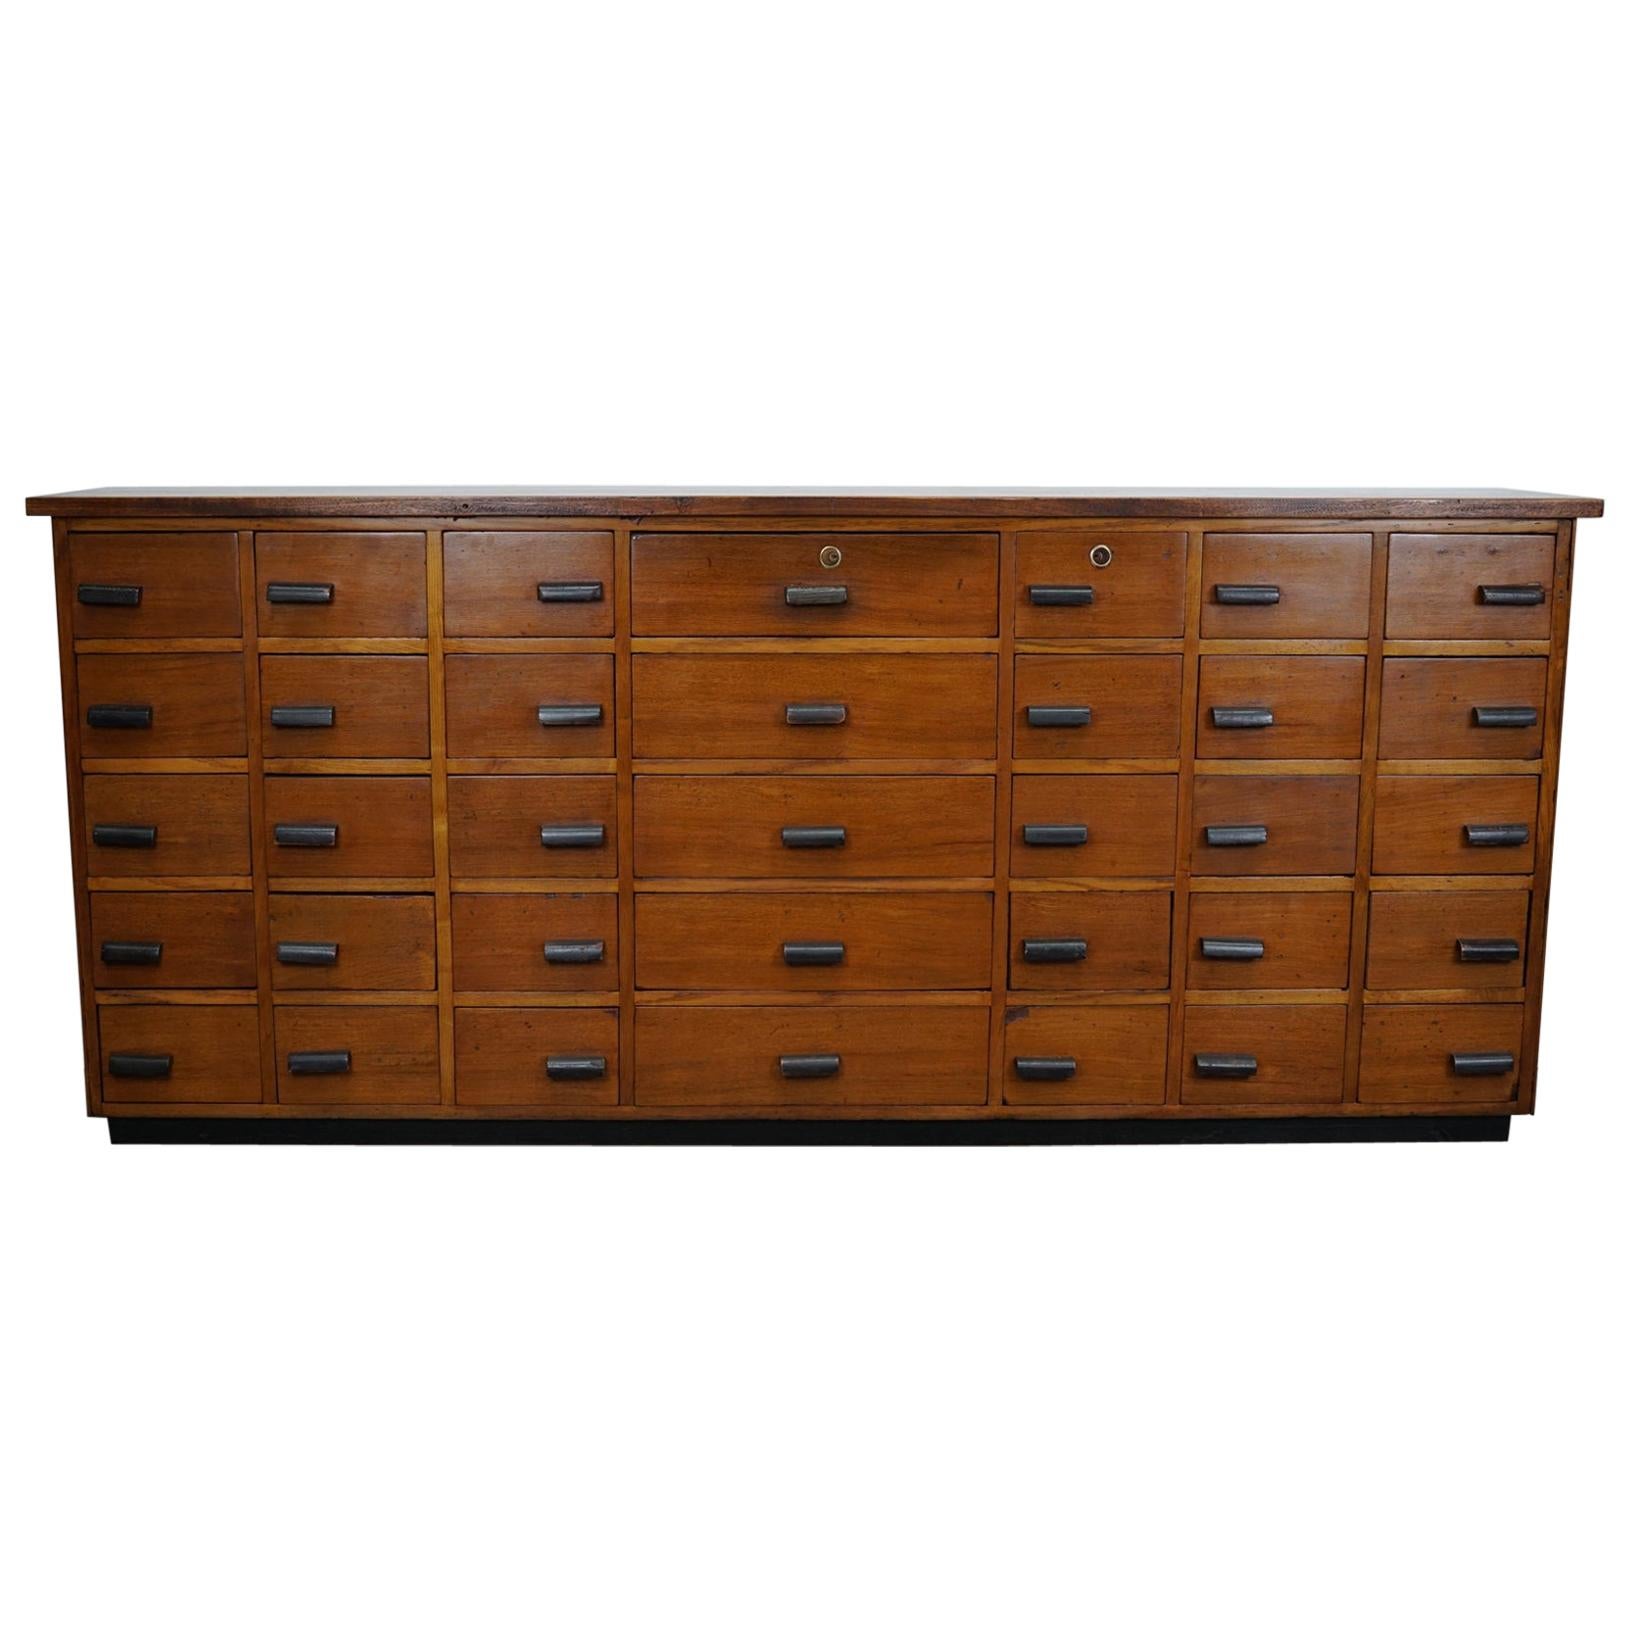 Large German Pine or Oak Apothecary Cabinet, 1940s